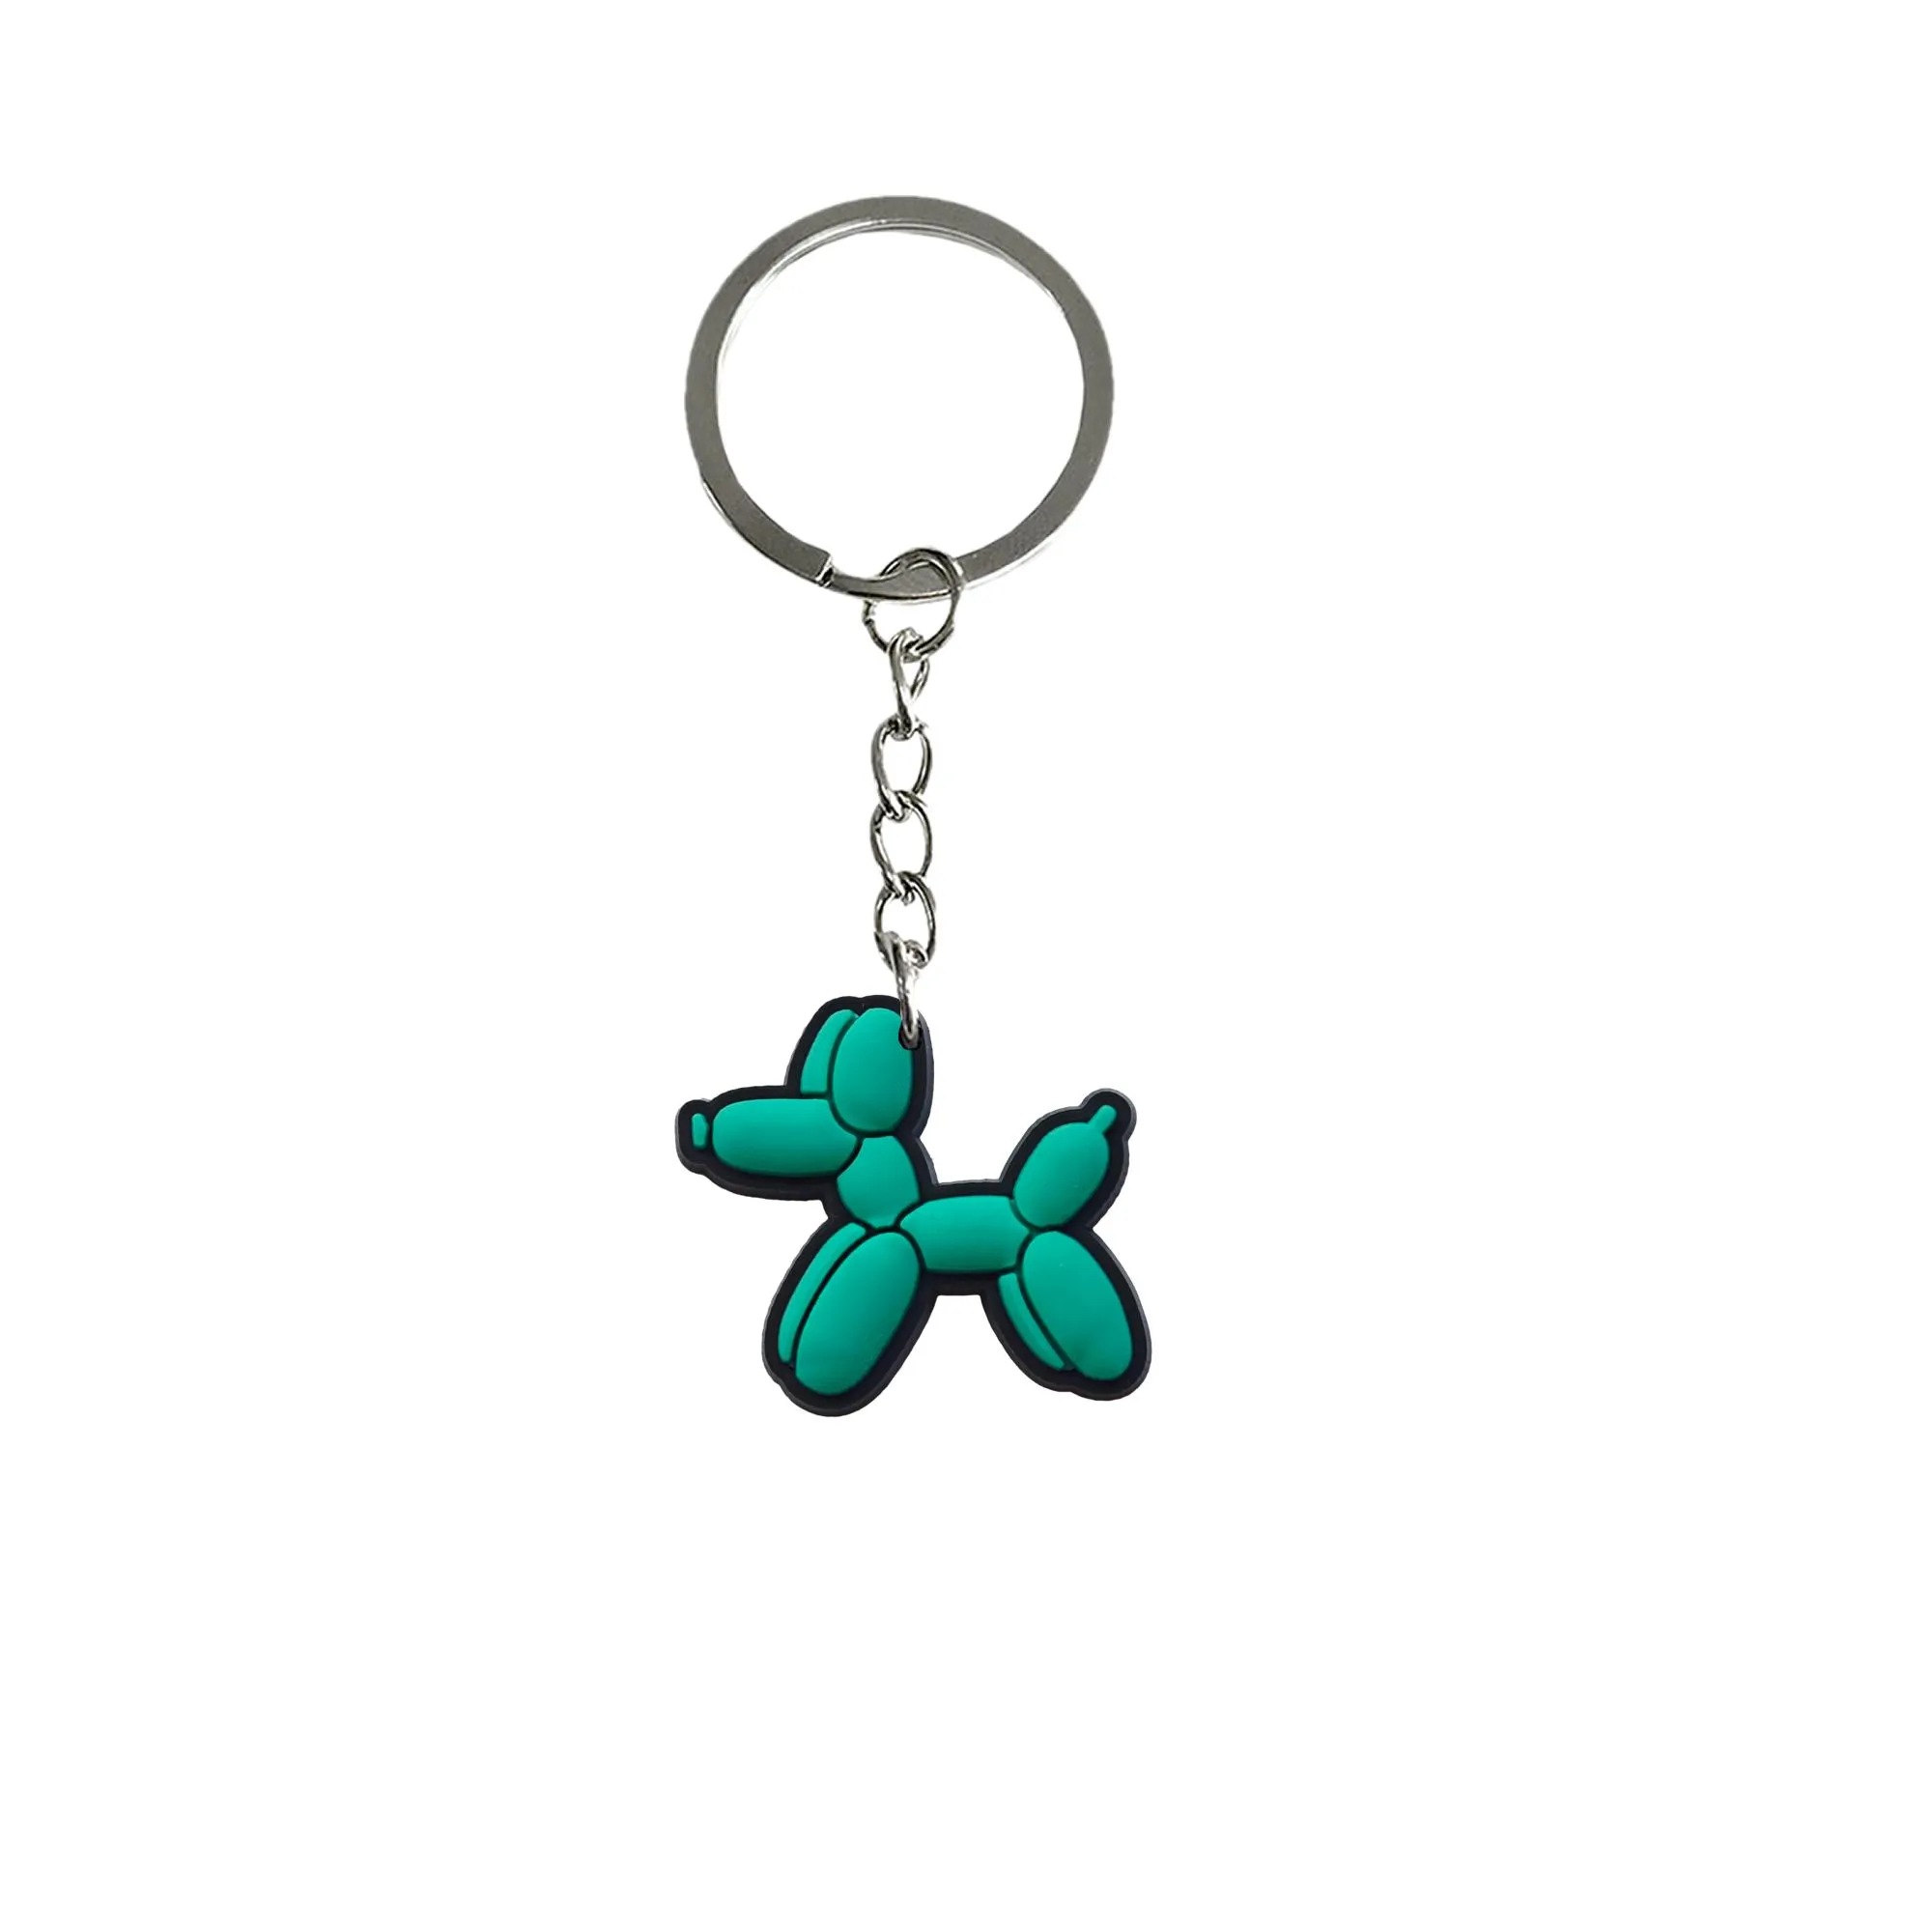 balloon dog keychain boys keychains anime cool for backpacks key pendant accessories bags keyring suitable schoolbag classroom prizes girls couple backpack chains women